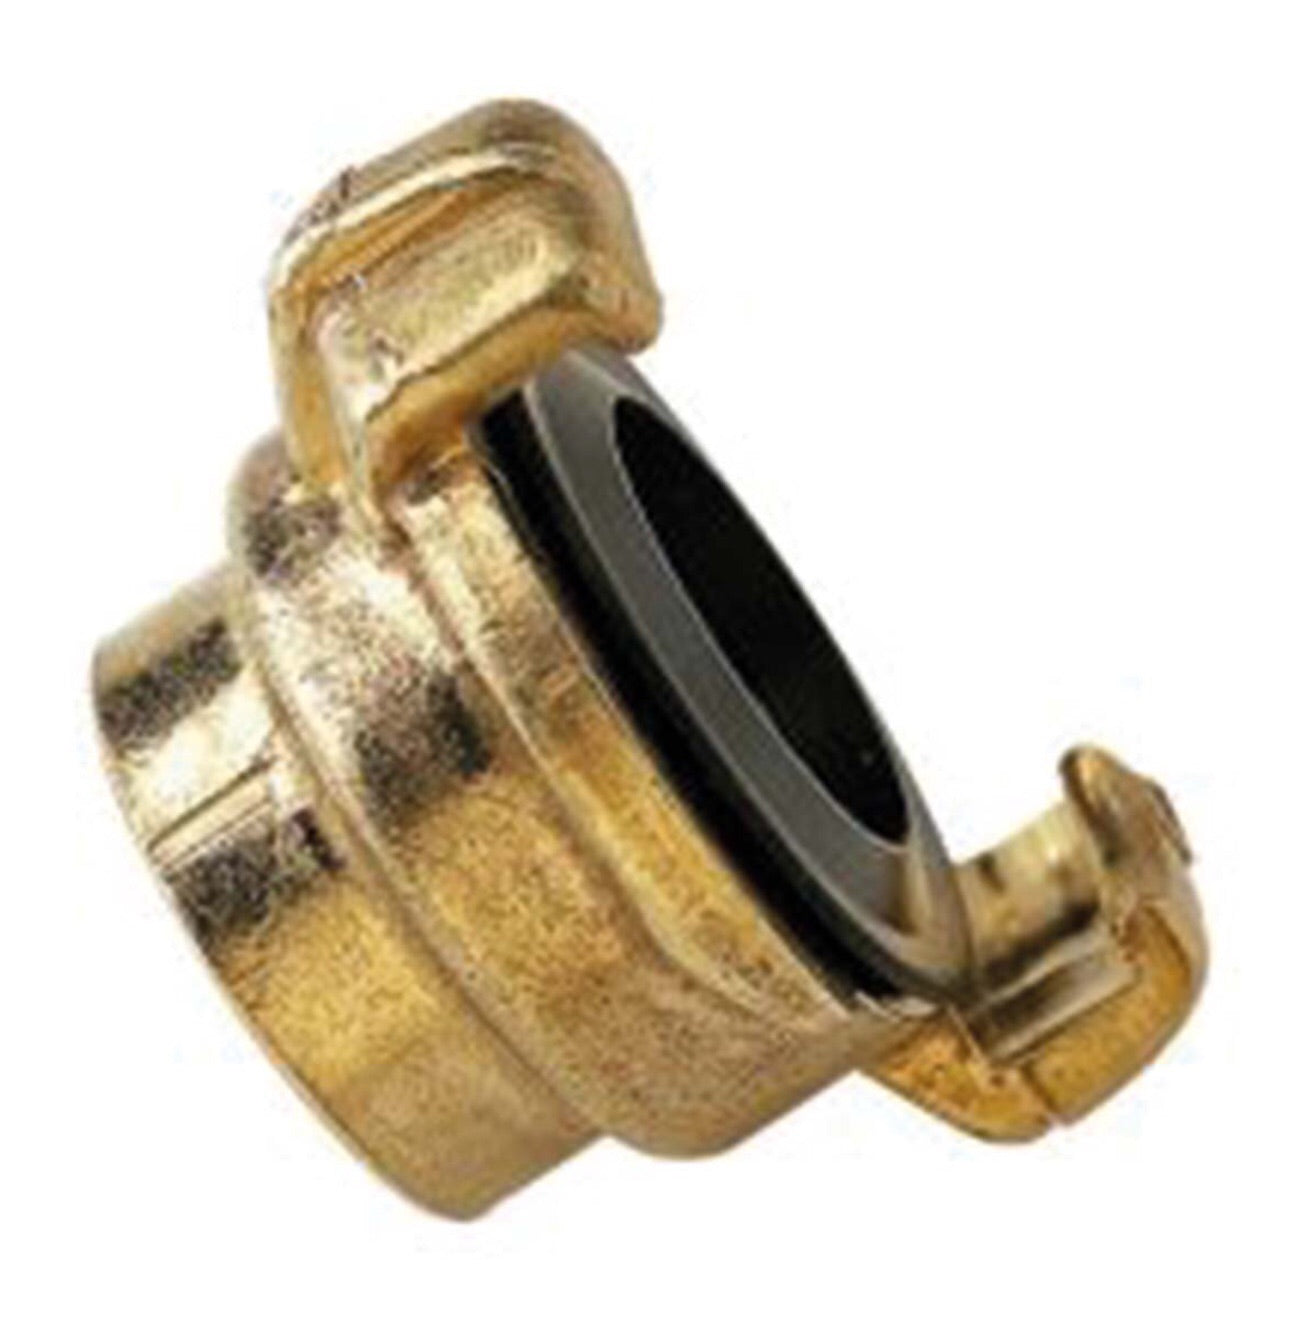 Geka Style Fitting to 3/4” female hose thread end , Part Number 3223636 for IMER Koine 35 / 4 pumps